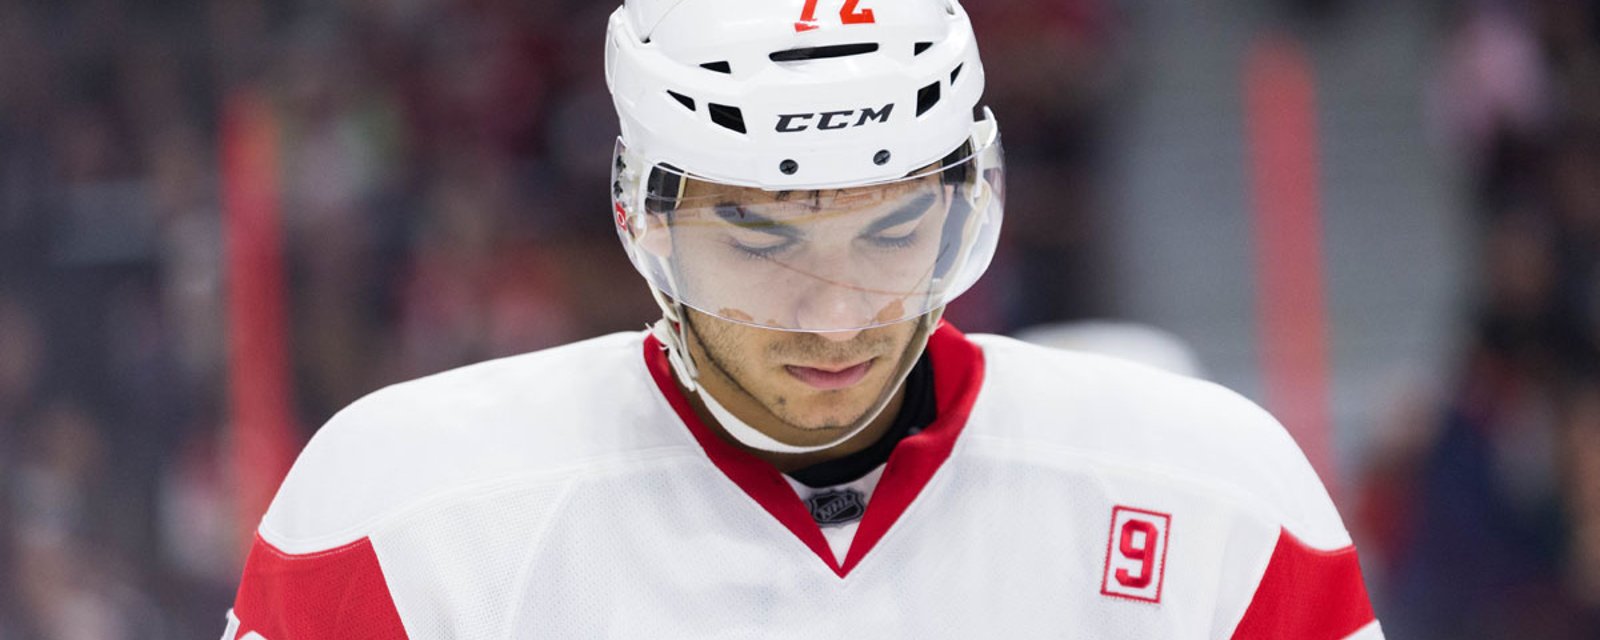 Report: Contradicting details leaked on Athanasiou negotiations